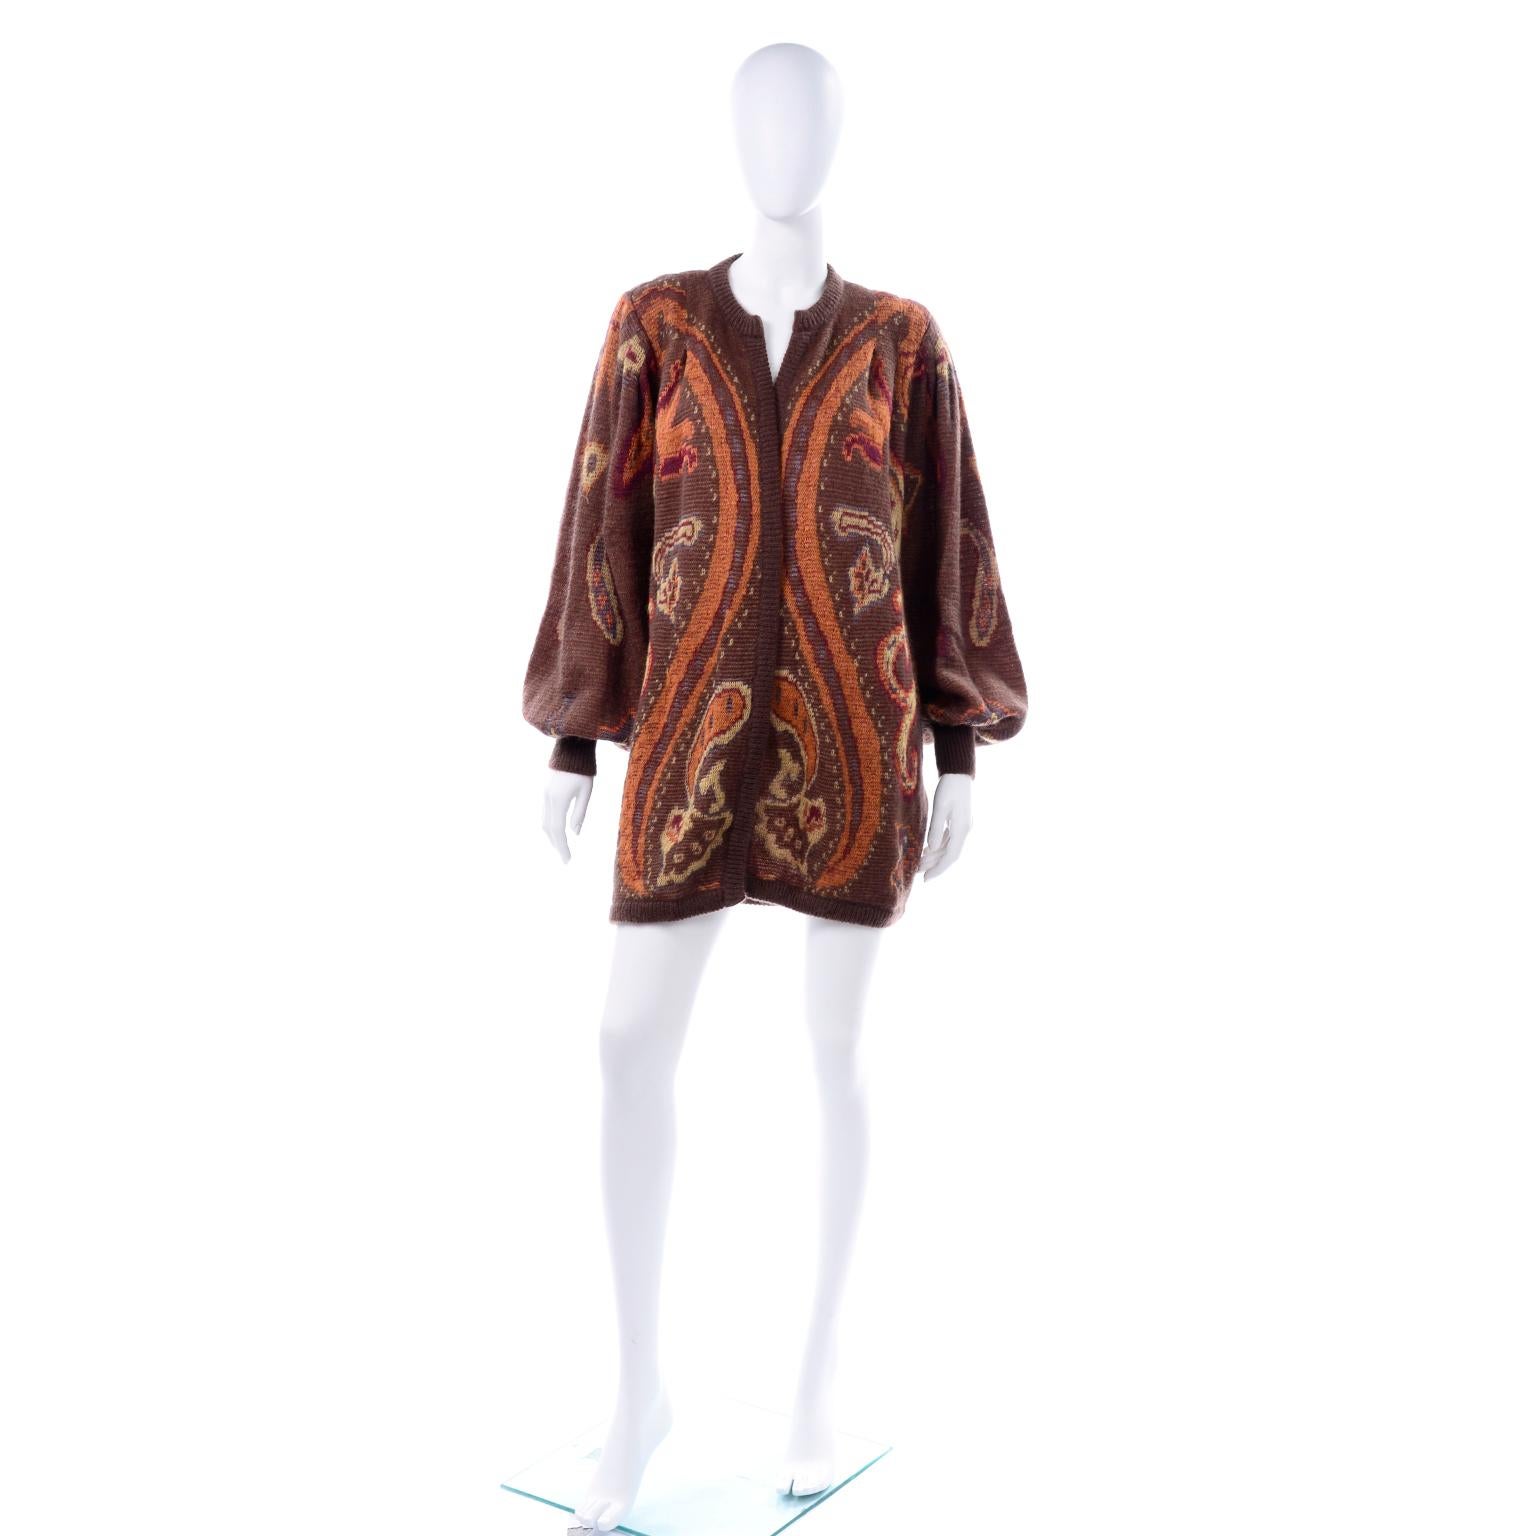 We love oversized sweaters and this vintage Escada paisley wool and mohair open cardigan sweater is one of our favorites for this Fall. There are no buttons or closures and the balloon sleeves are pleated at the shoulders for additional volume. This